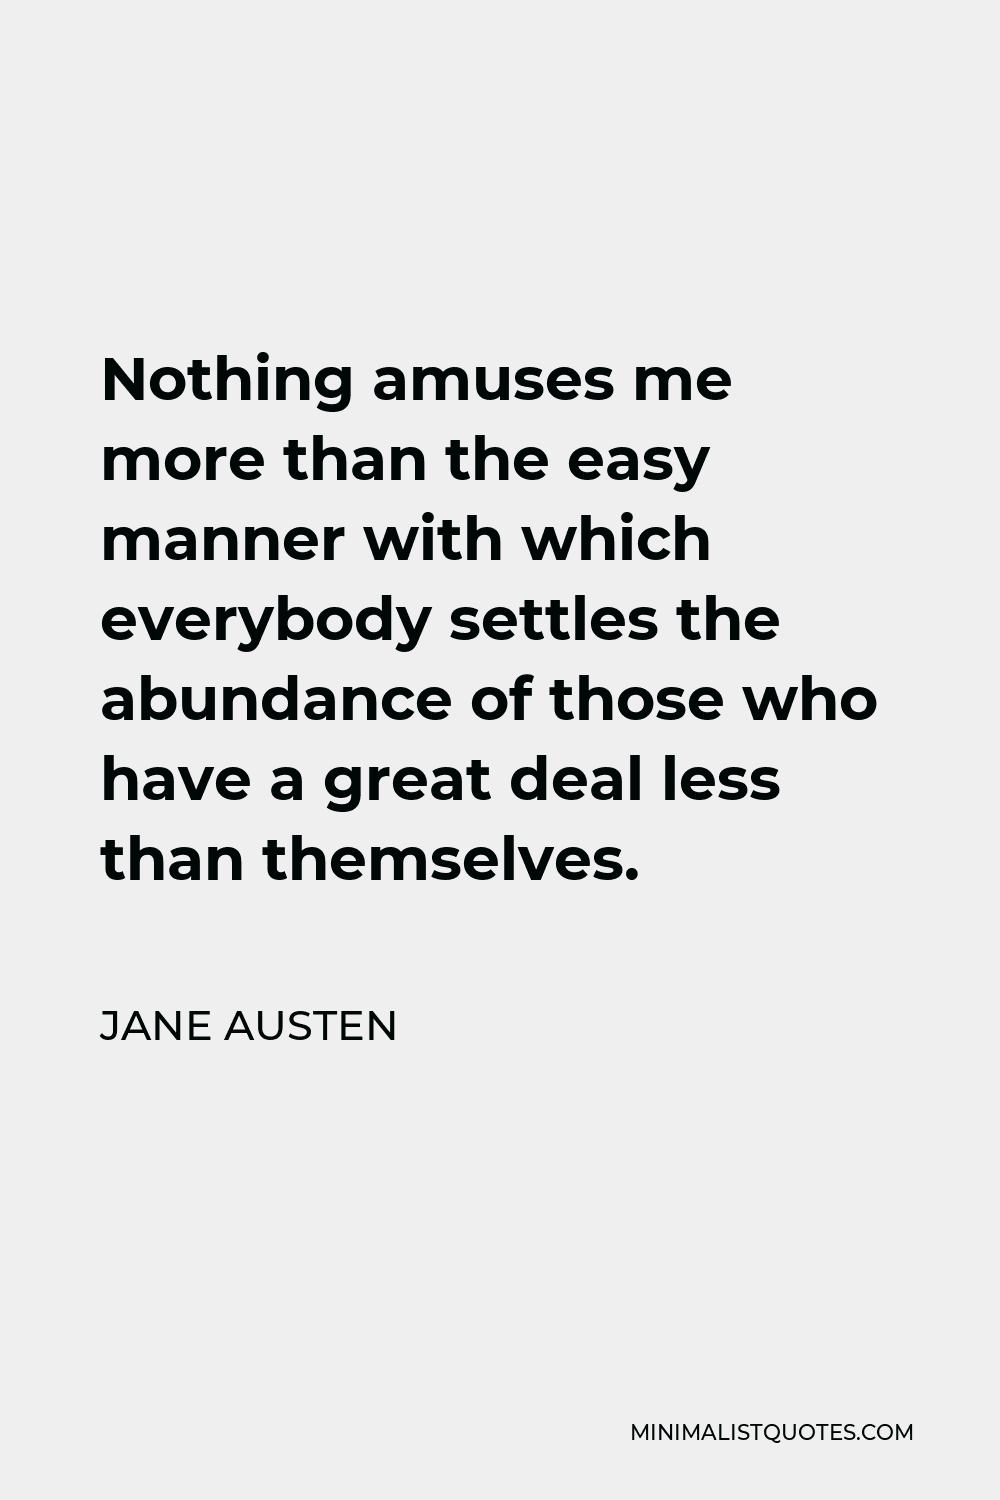 Jane Austen Quote - Nothing amuses me more than the easy manner with which everybody settles the abundance of those who have a great deal less than themselves.